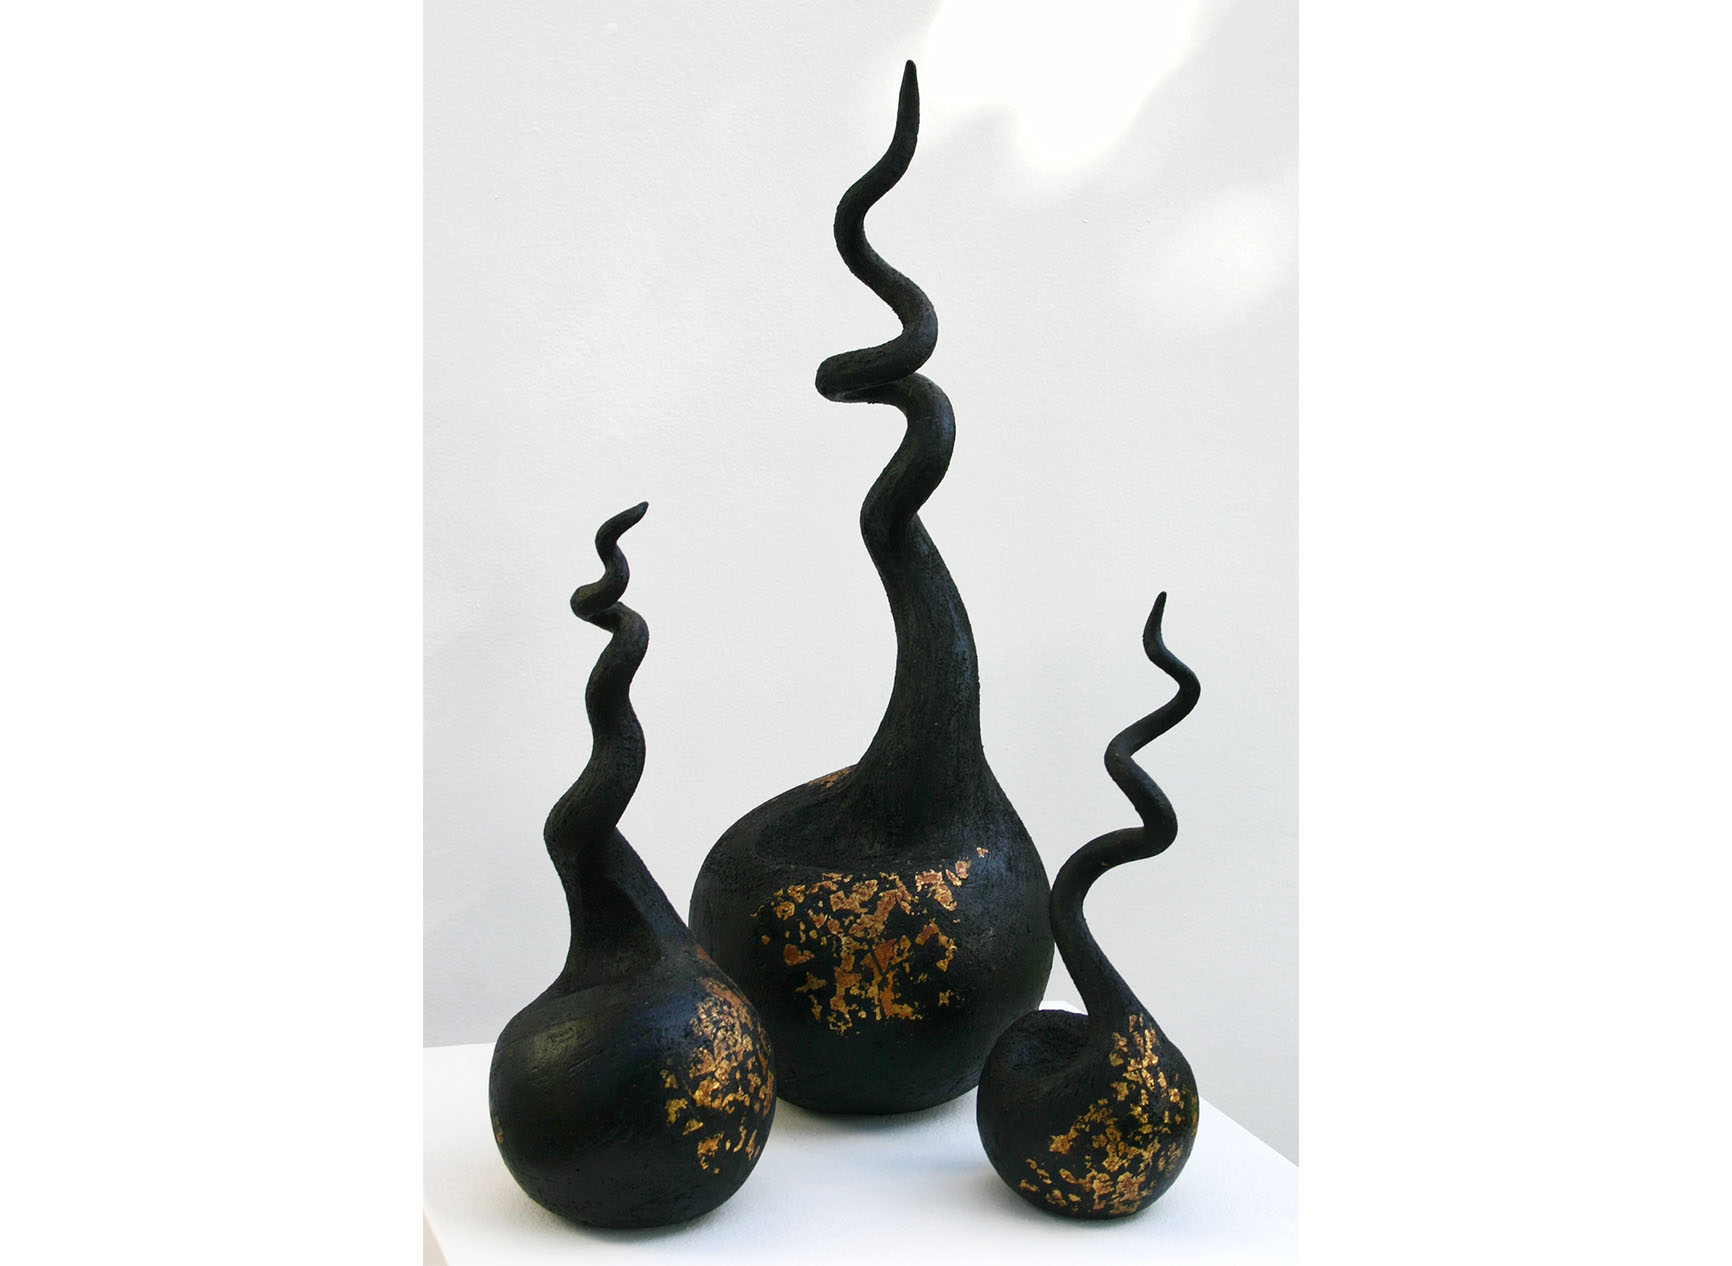 Three black curly sculptures of differing sizes decorated with gold leaf, called Black Triad